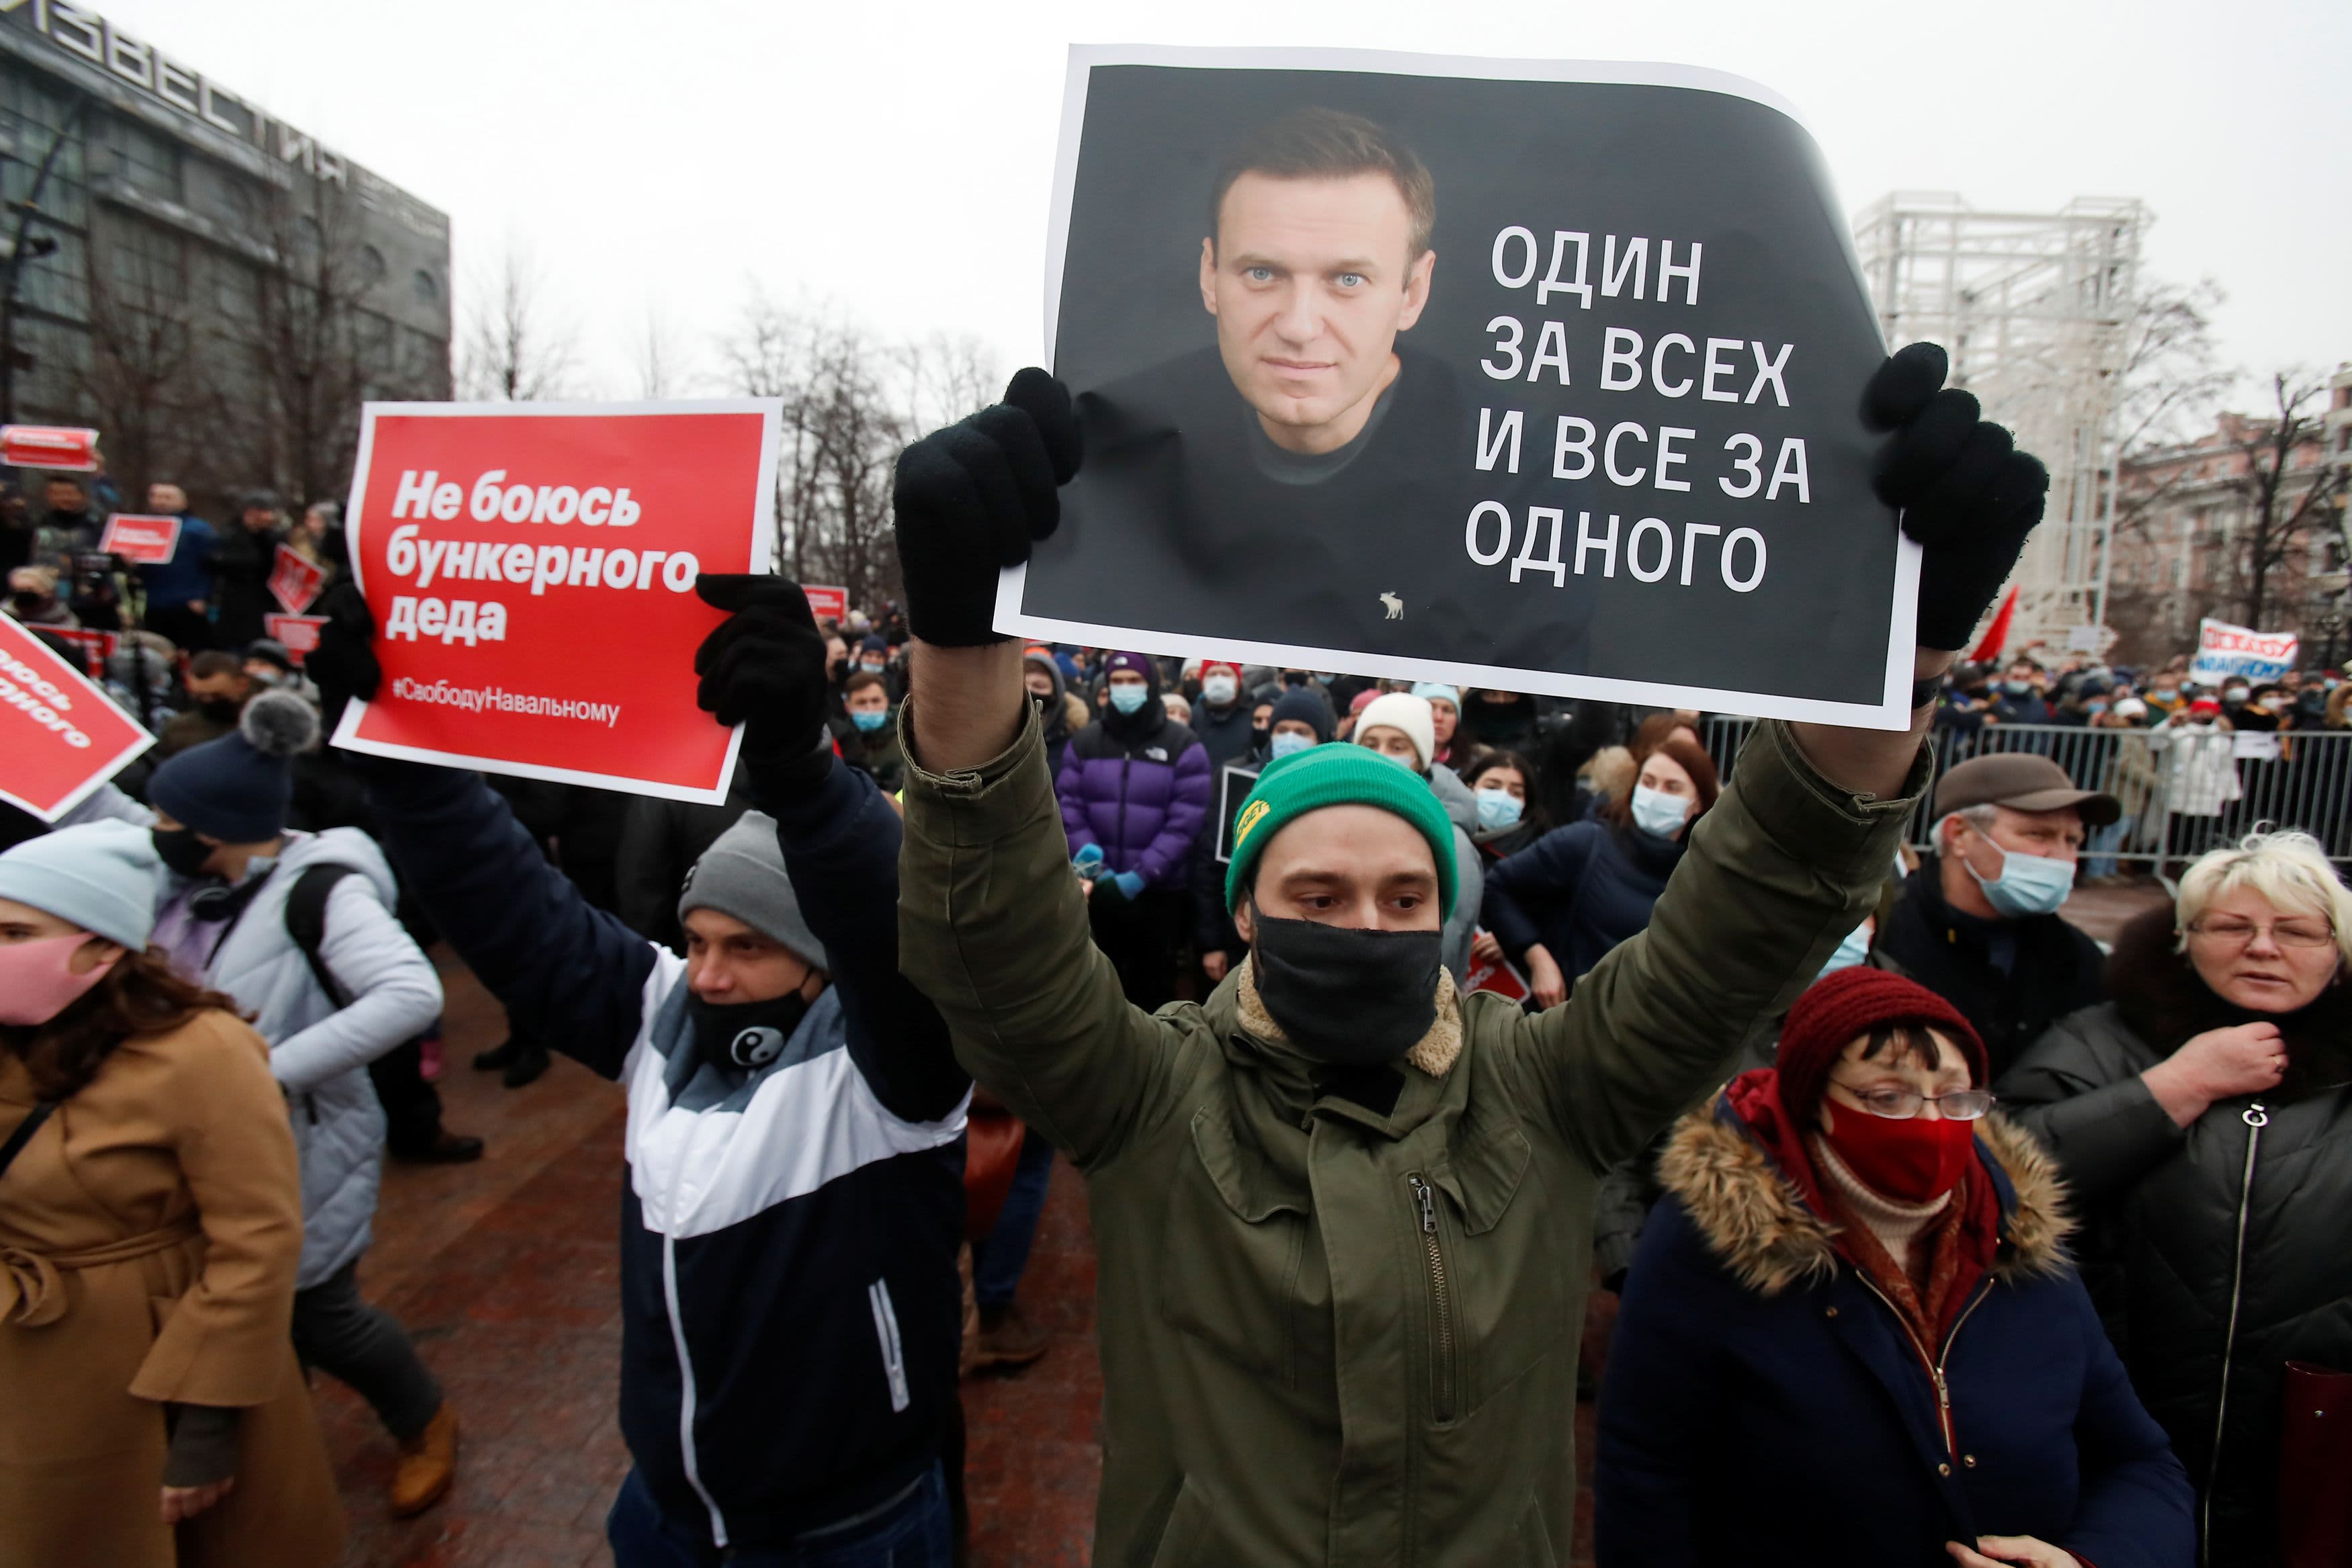 Foreign Minister Blinken is targeting Russia’s treatment of opposition leader Navalny